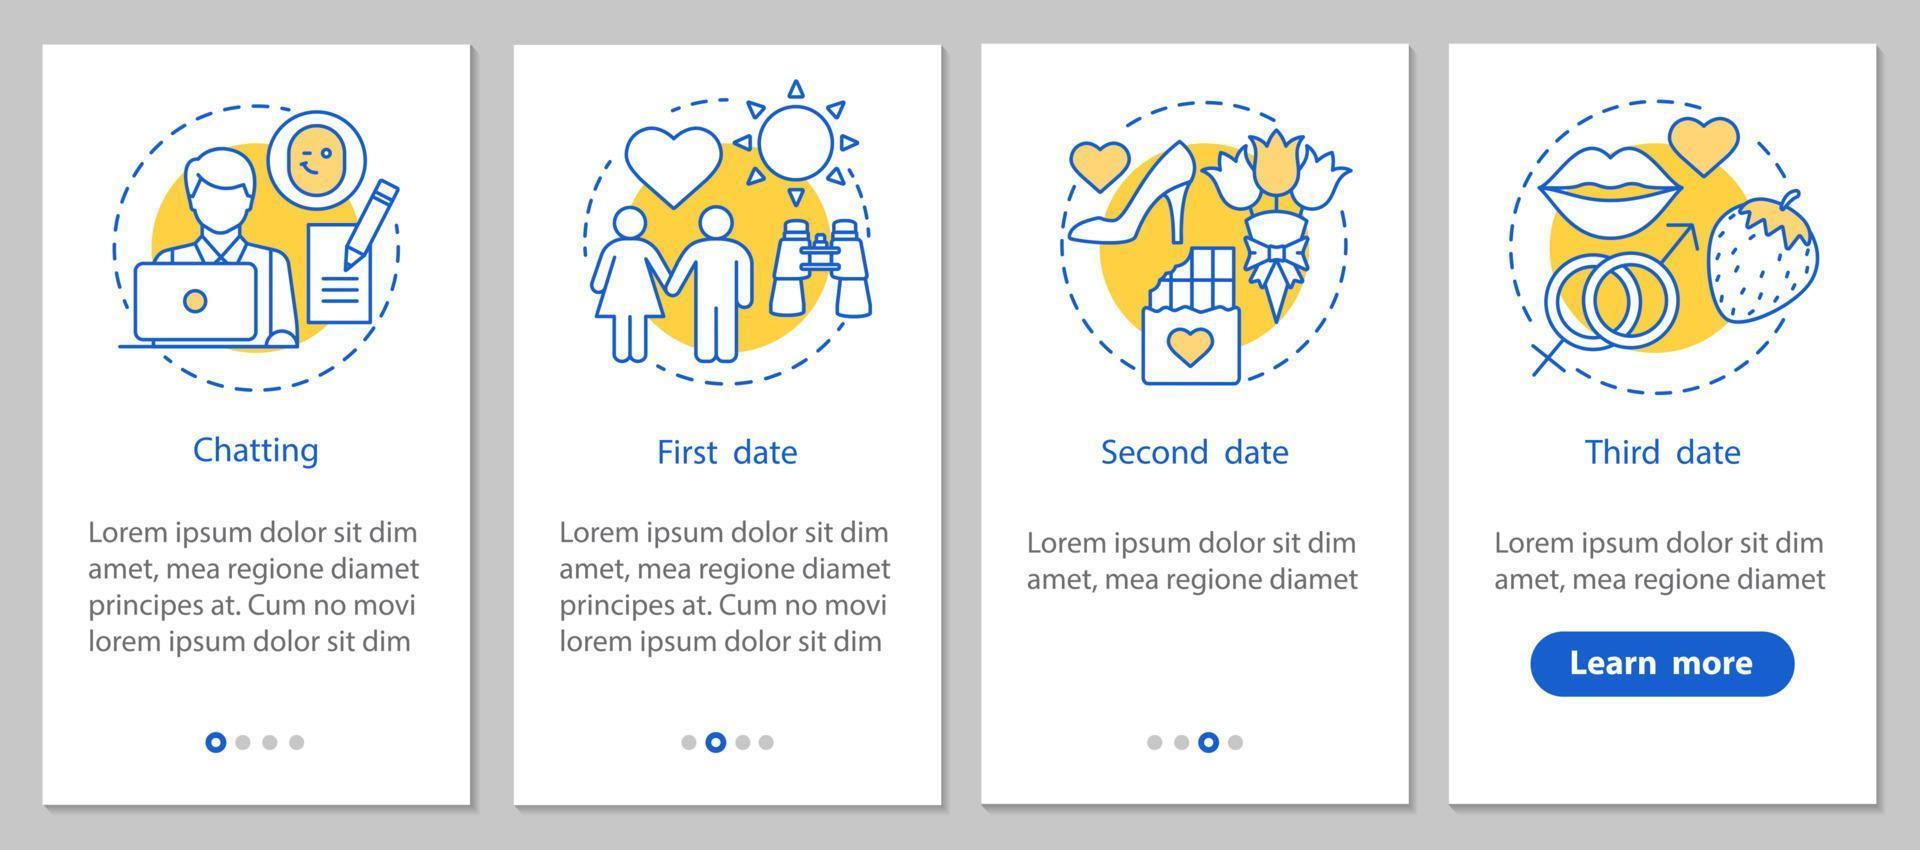 Online dating onboarding mobile app page screen with linear concepts. Romantic relationships development steps graphic instructions. UX, UI, GUI vector template with illustrations